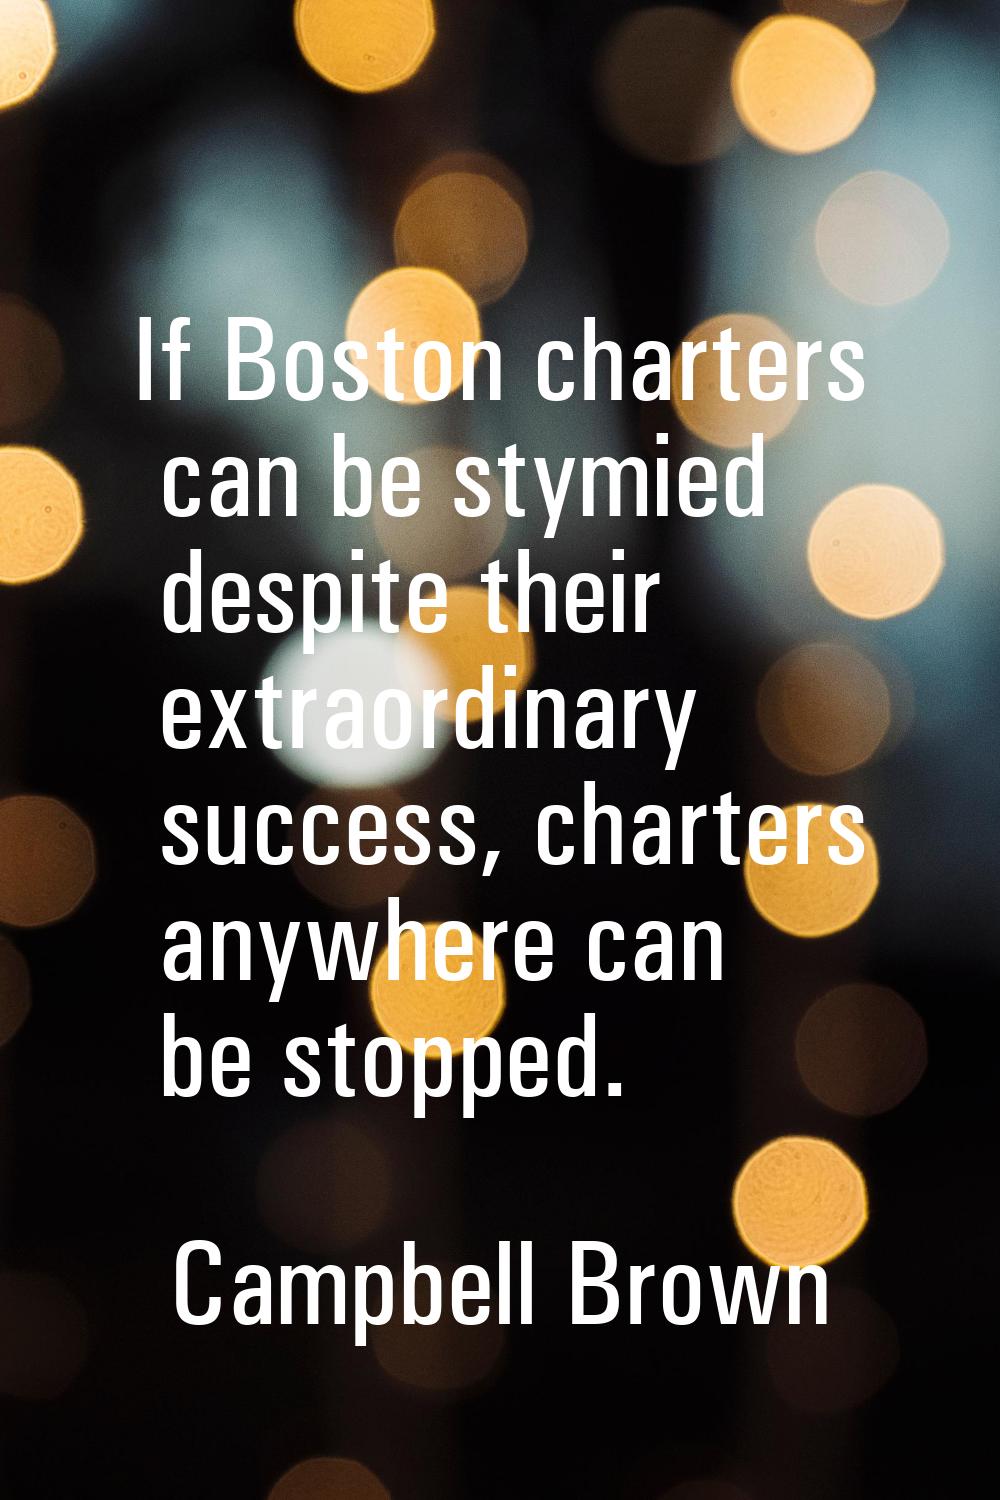 If Boston charters can be stymied despite their extraordinary success, charters anywhere can be sto